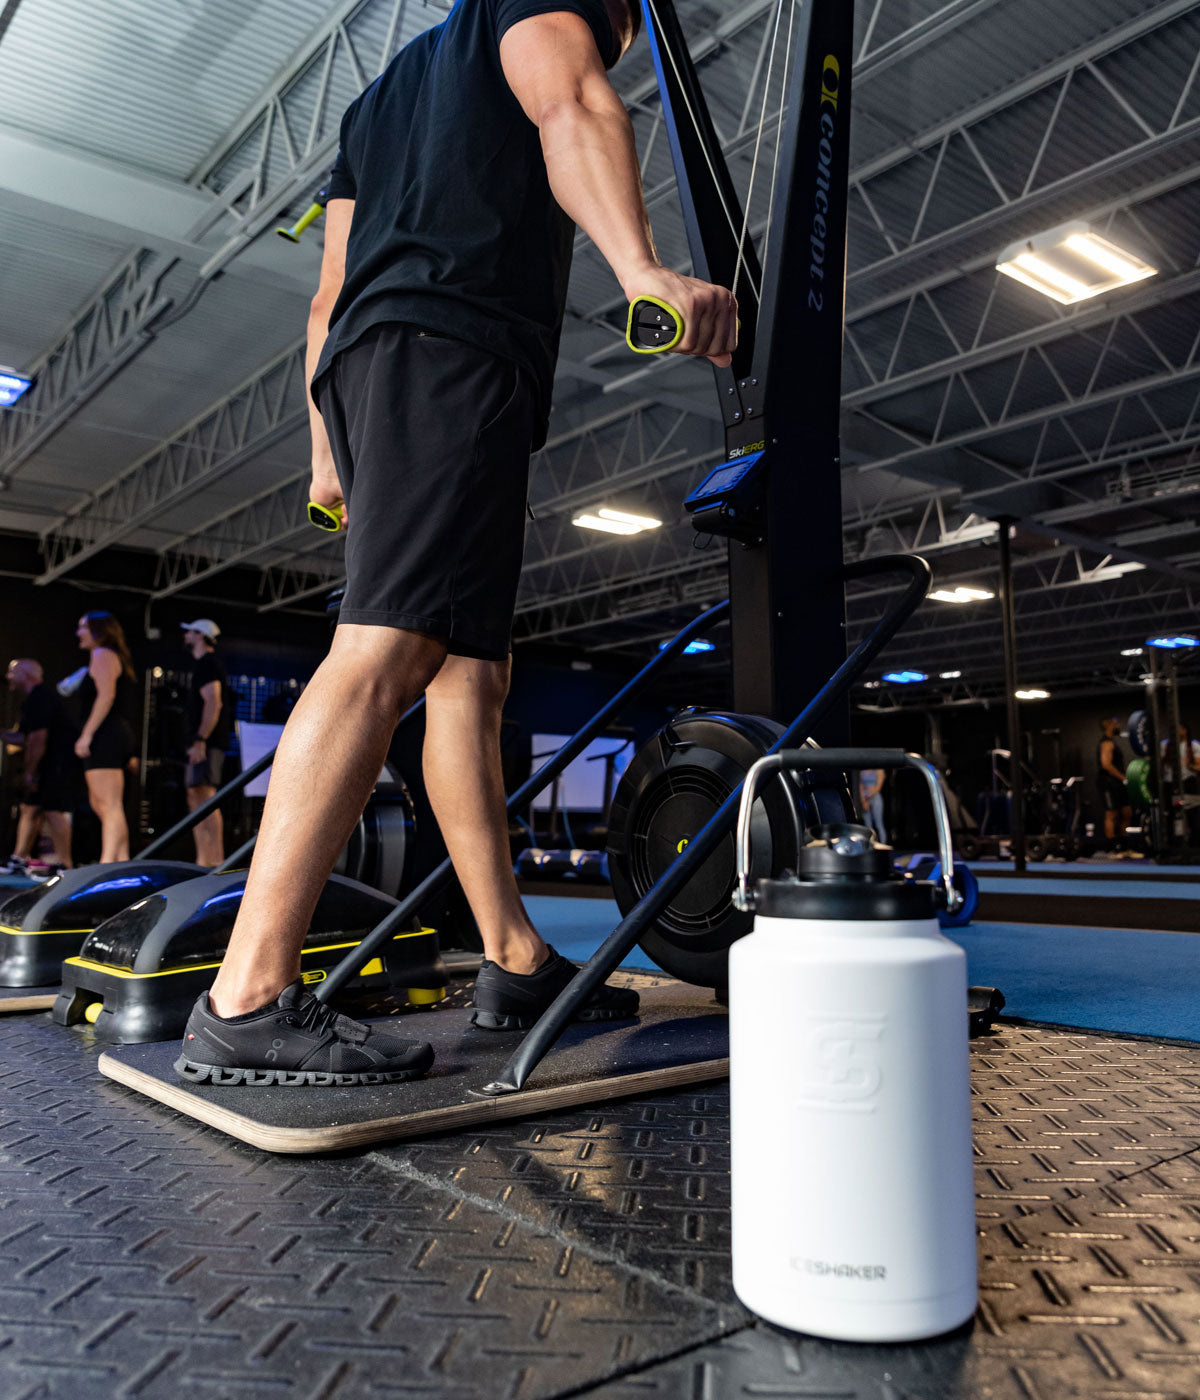 An image of a White-colored Half Gallon Jug sitting on the floor of a gym. In the background, a man is using a machine to workout.